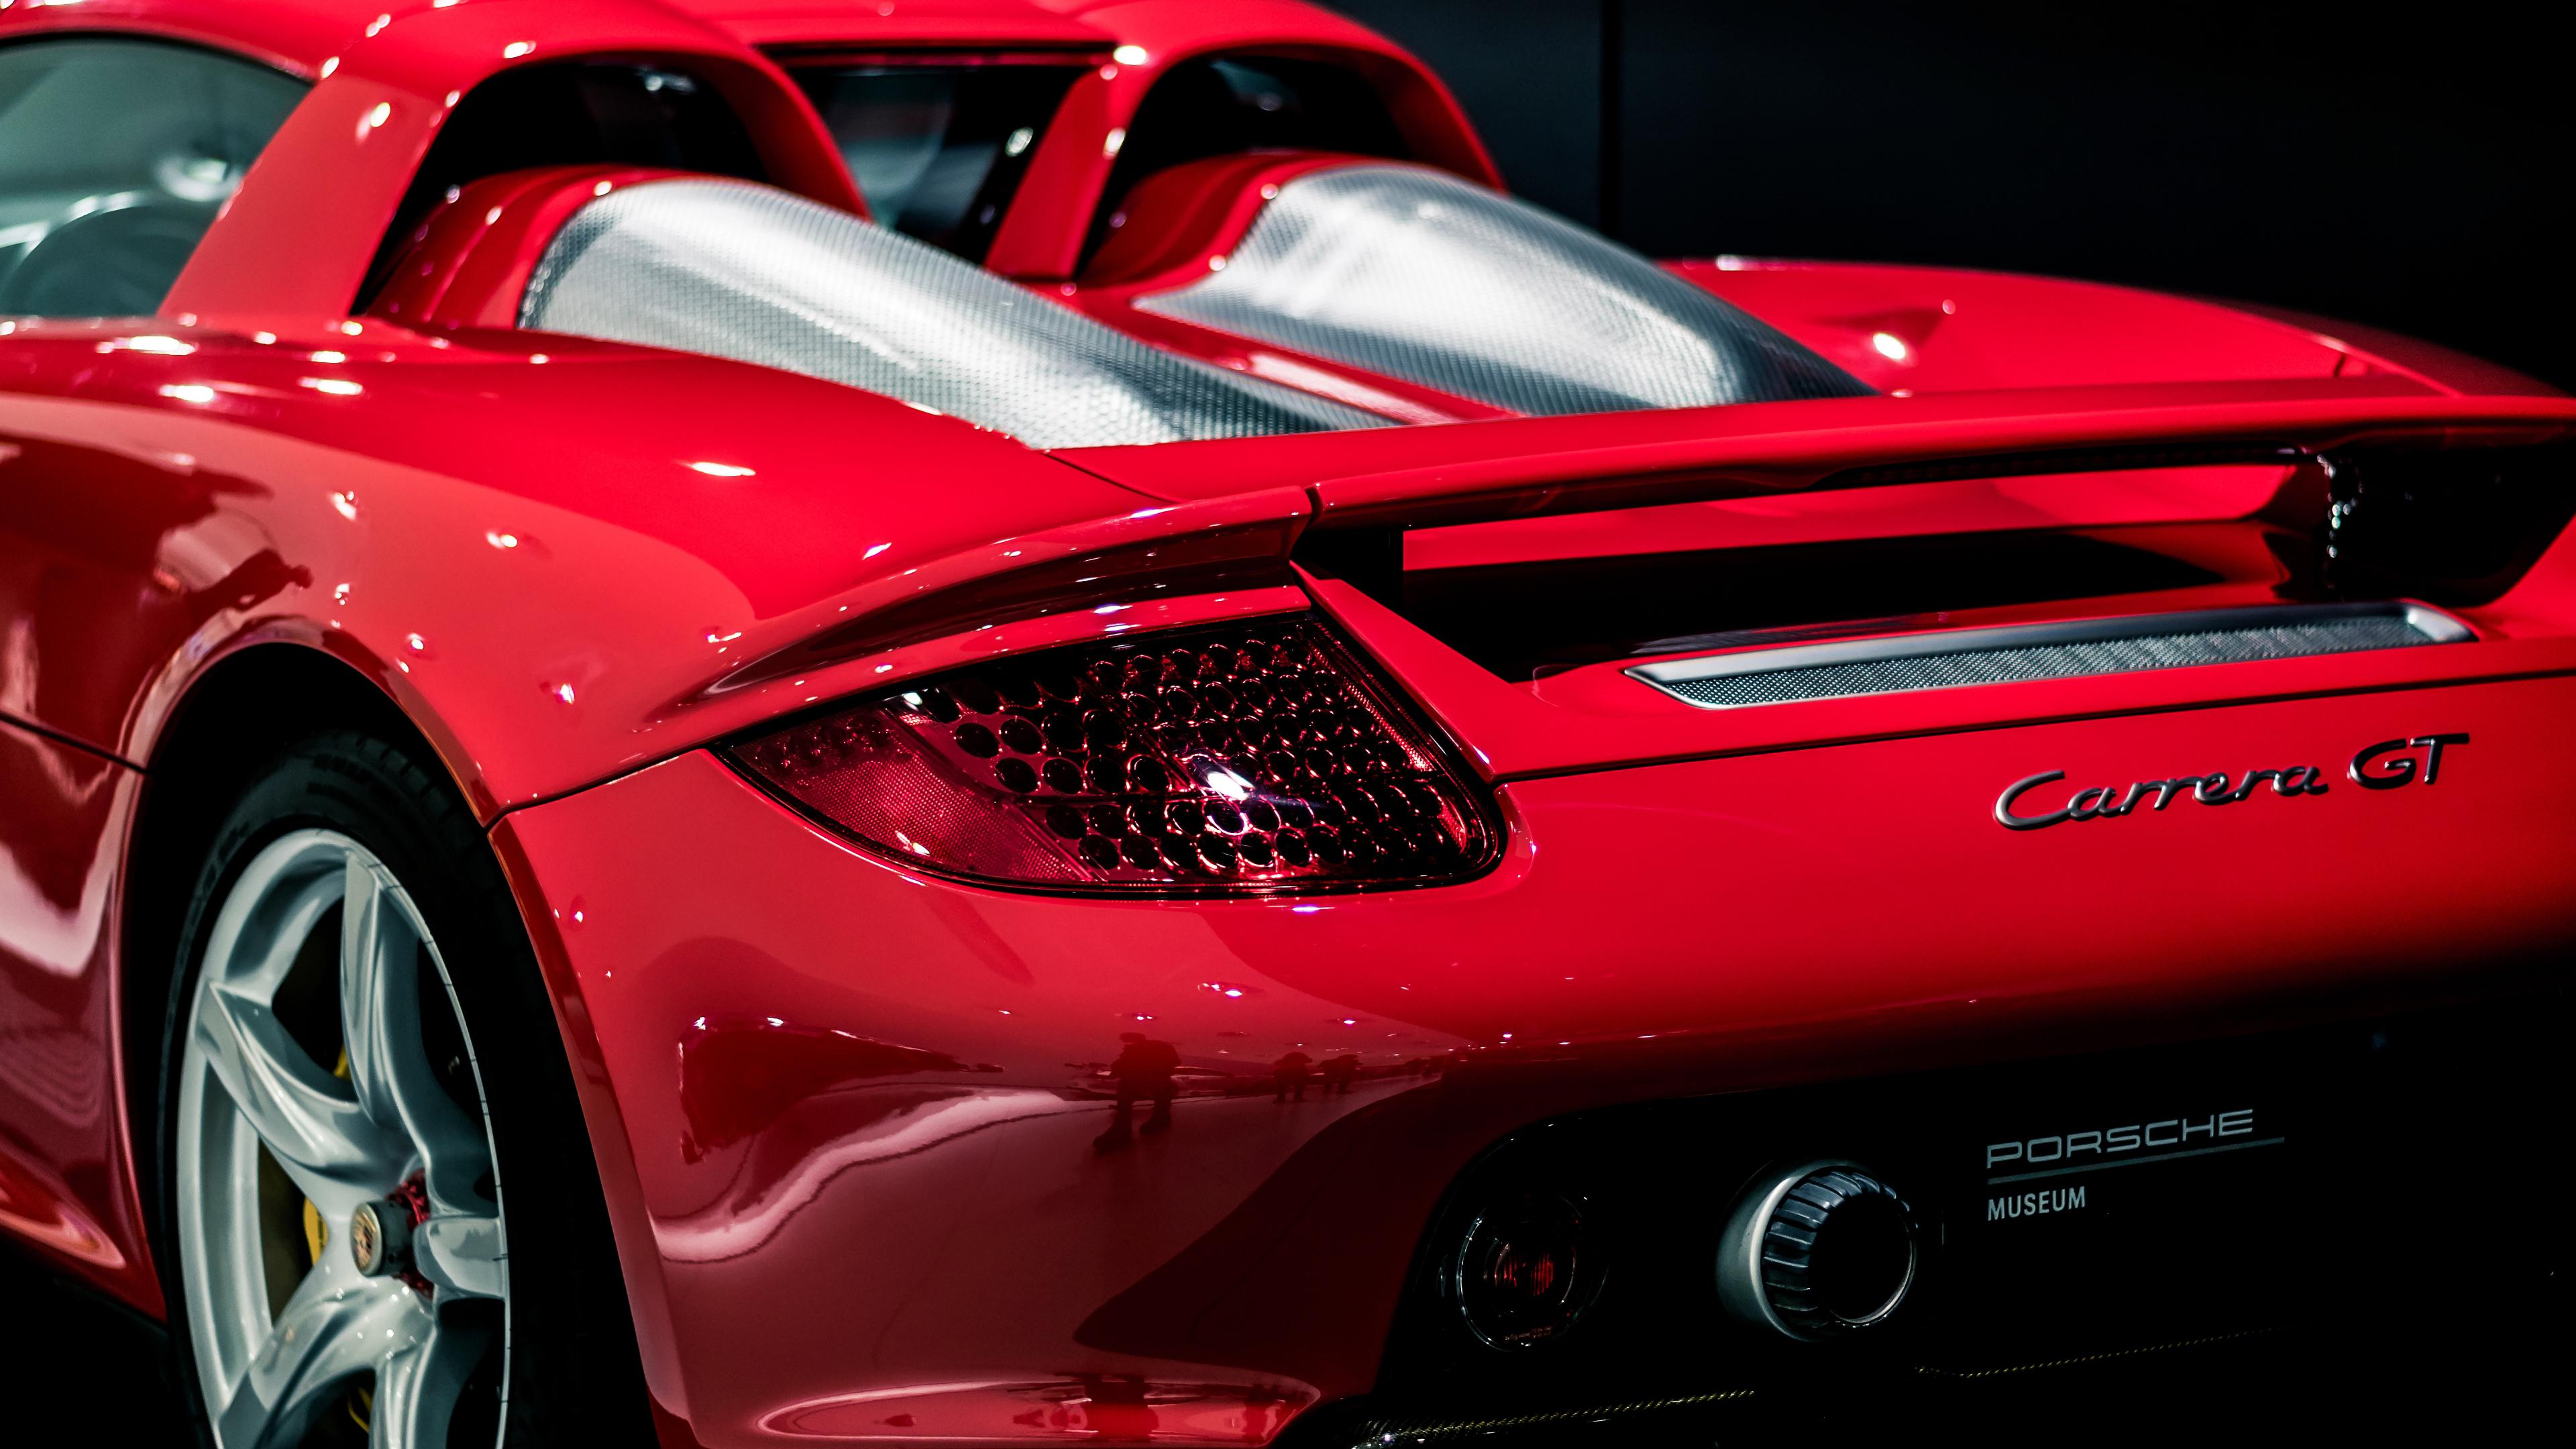 Porsche Red Car Wallpapers - Rev Up Your Screens with Stunning ...